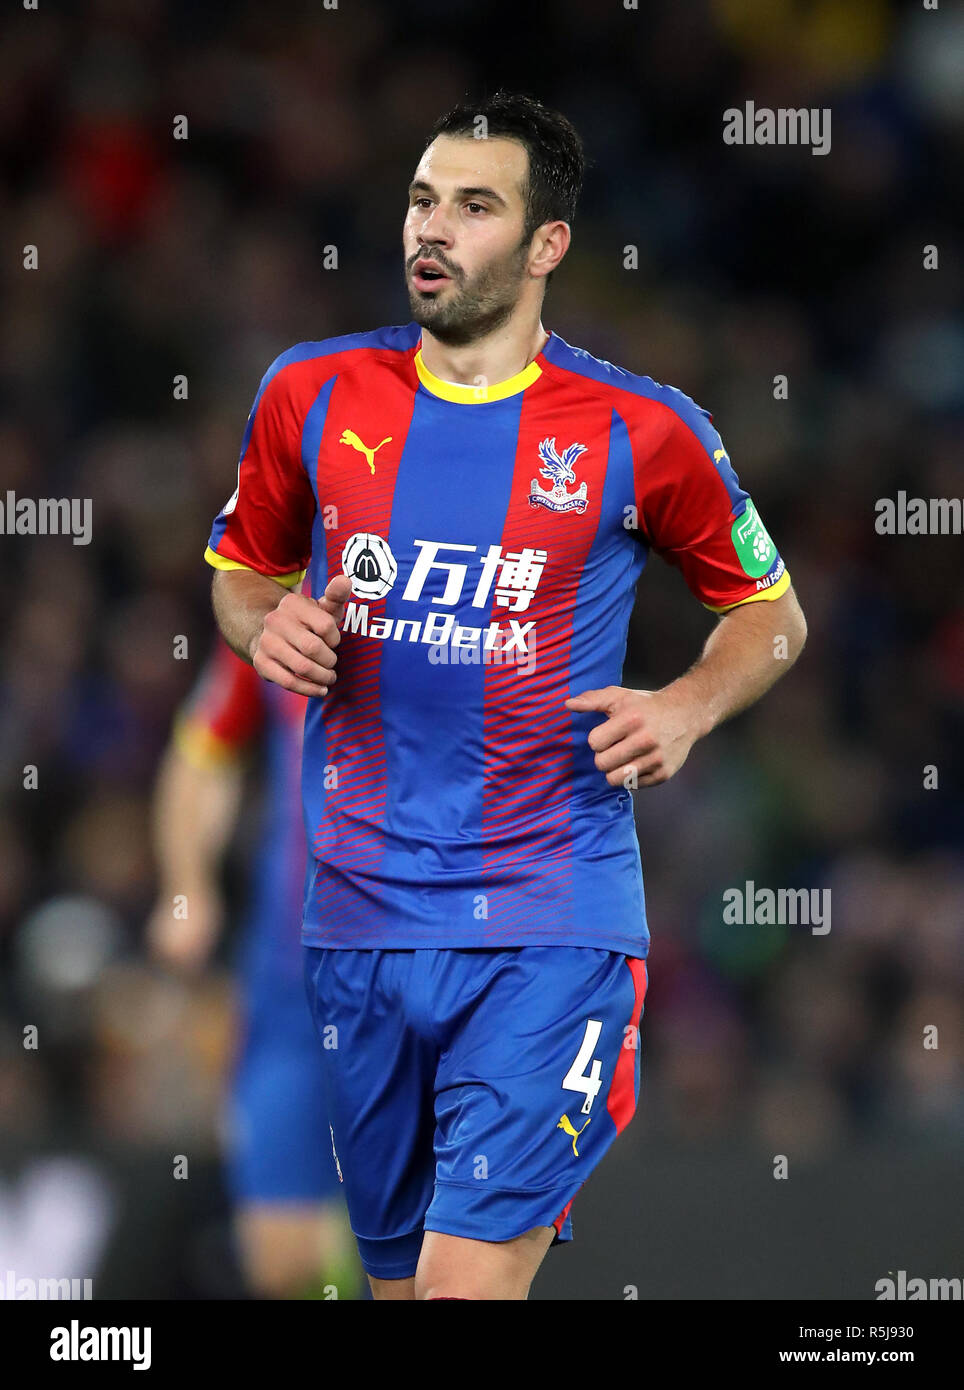 Crystal Palace's Luka Milivojevic without the rainbow captain's armband visable during the Premier League match at Selhurst Park, London. Stock Photo